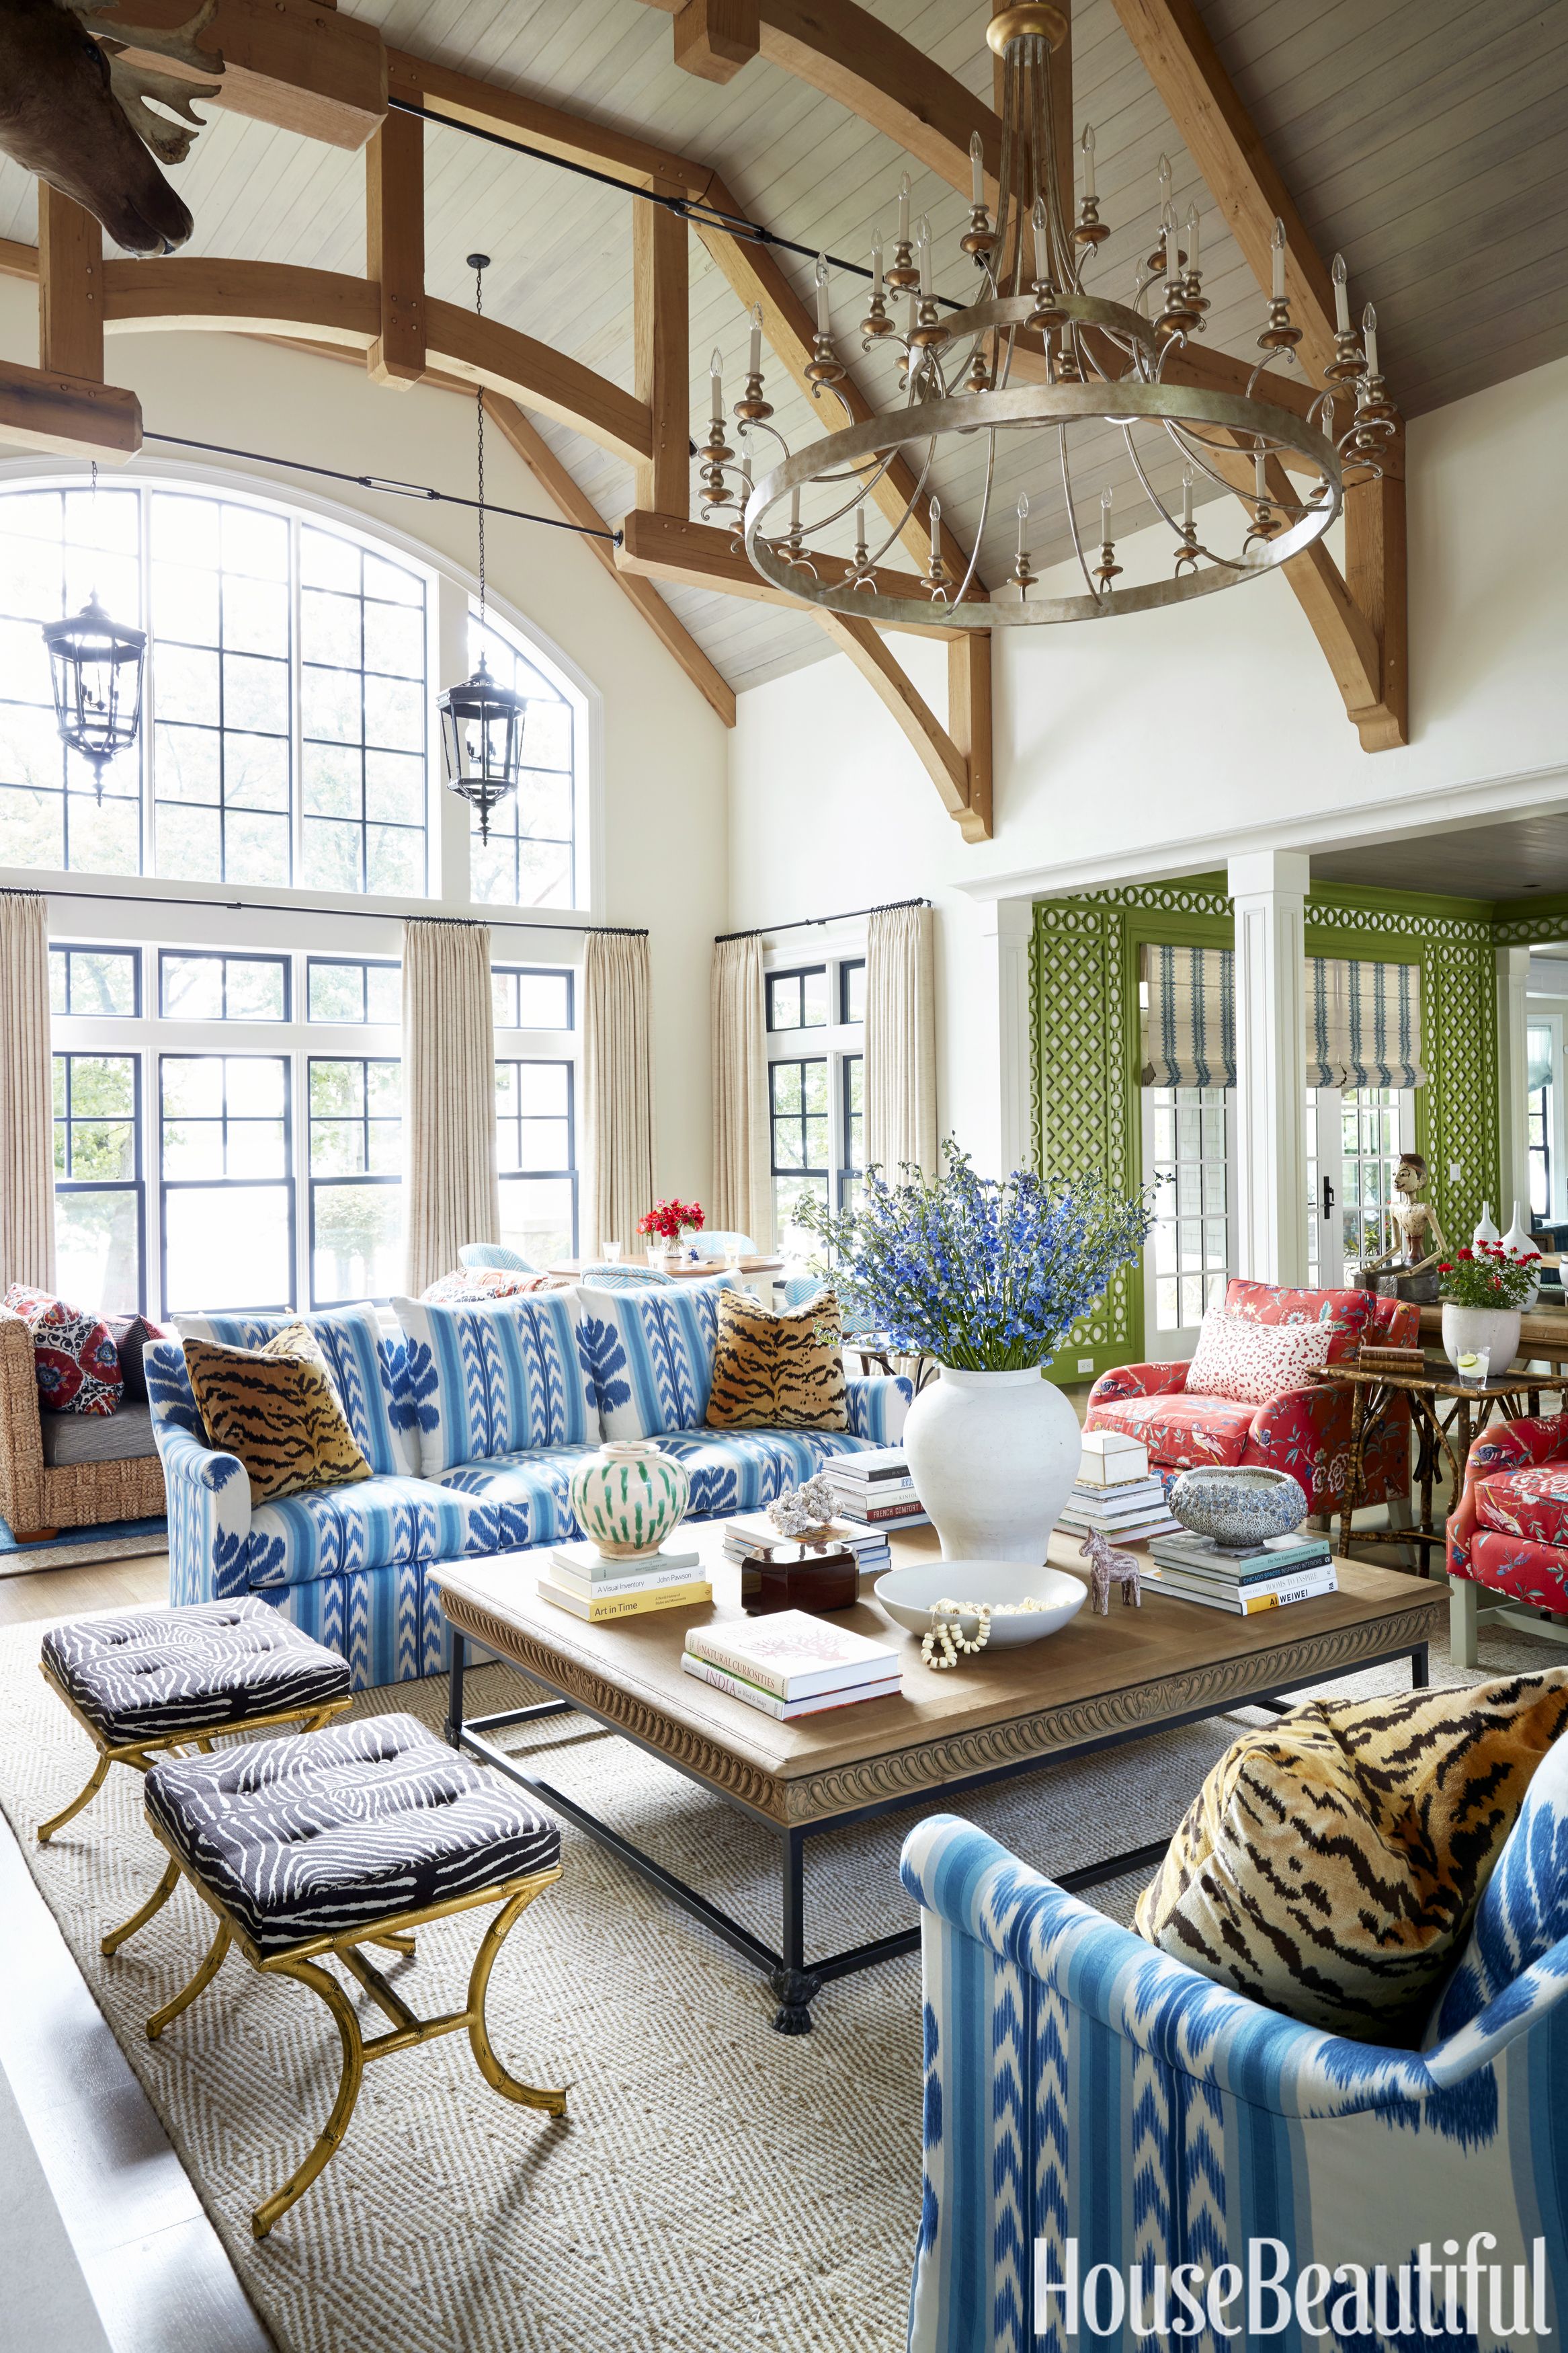 Summer Thornton Designs a Colorful Lake House - Tour a Green Lake Vacation  Home